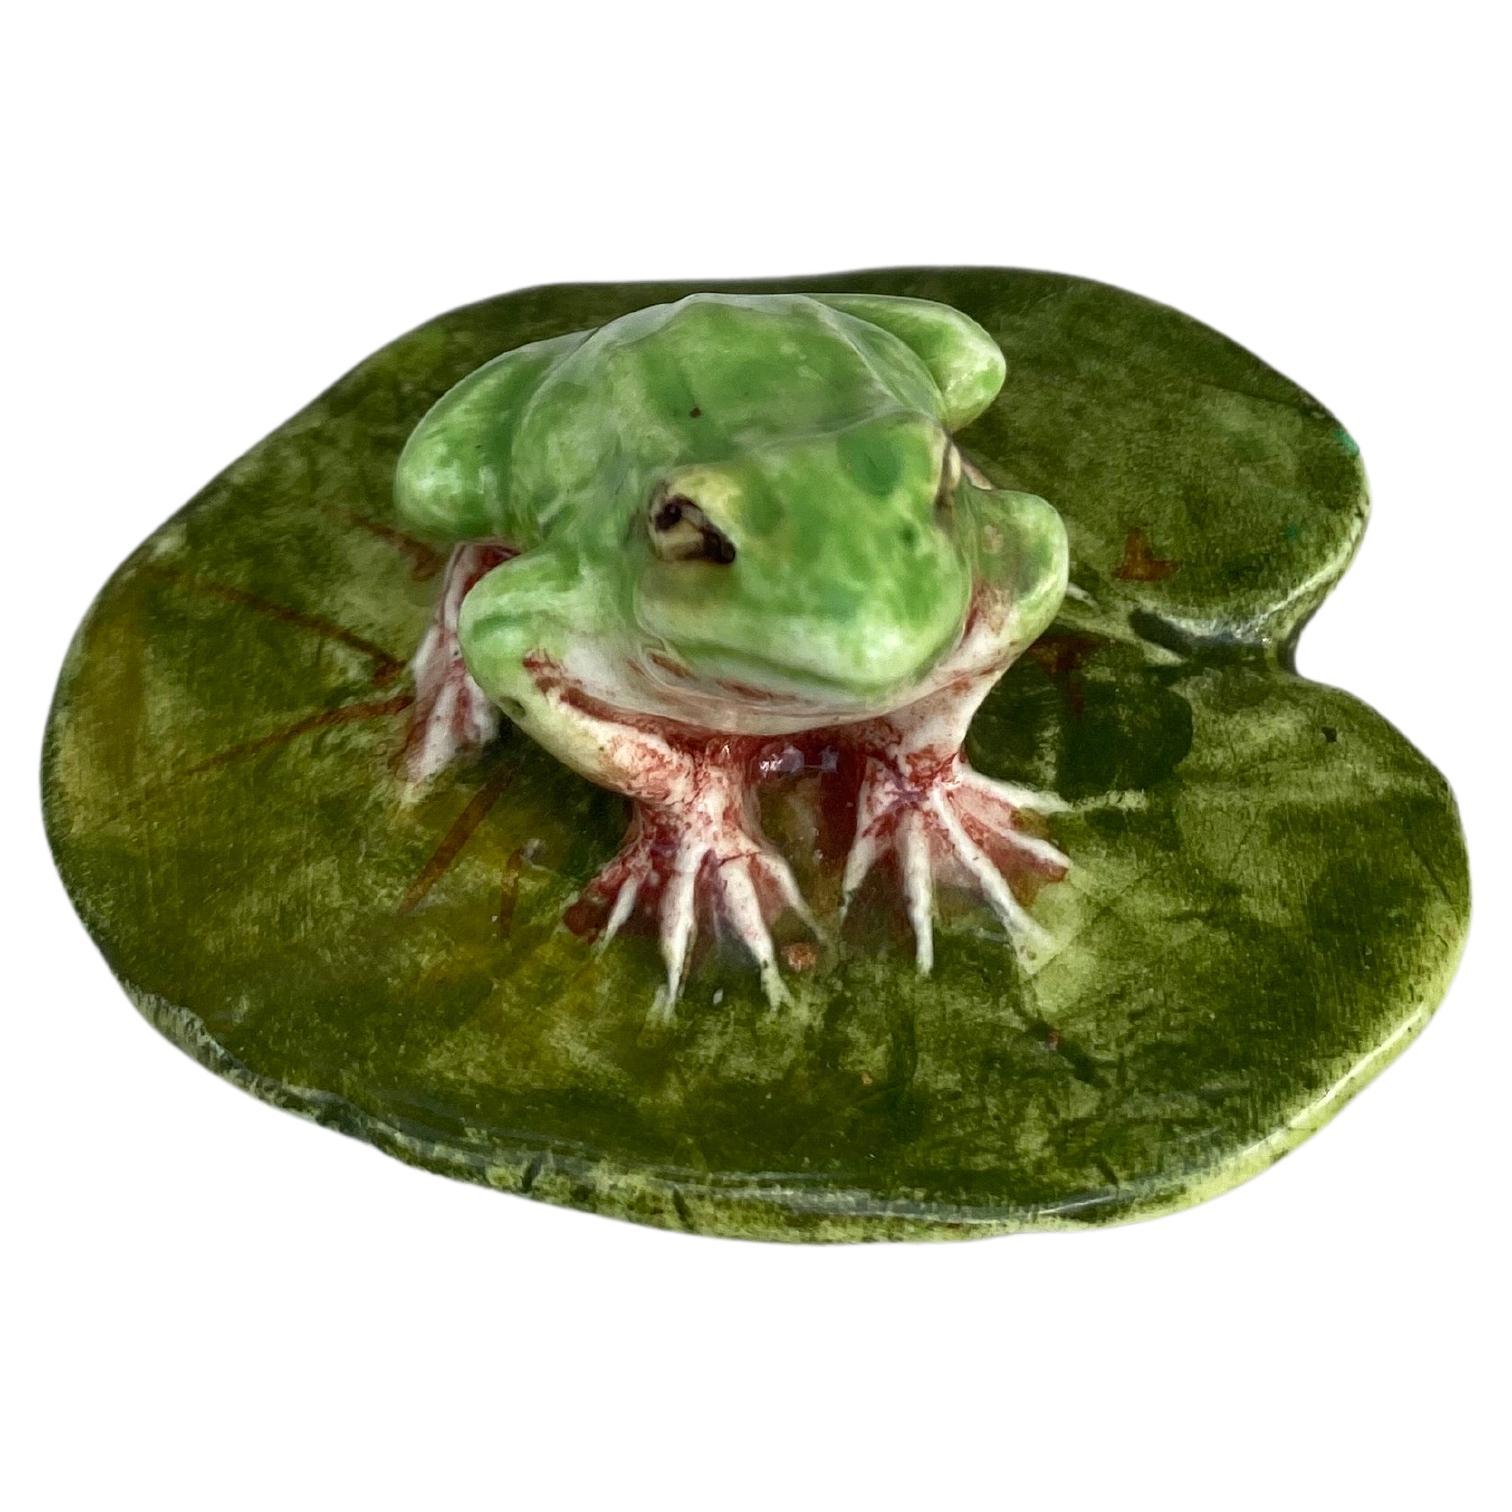 Rare Majolica frog on a green lily pad leaf Jerome Massier, circa 1900.
Reference / Page 118,119 